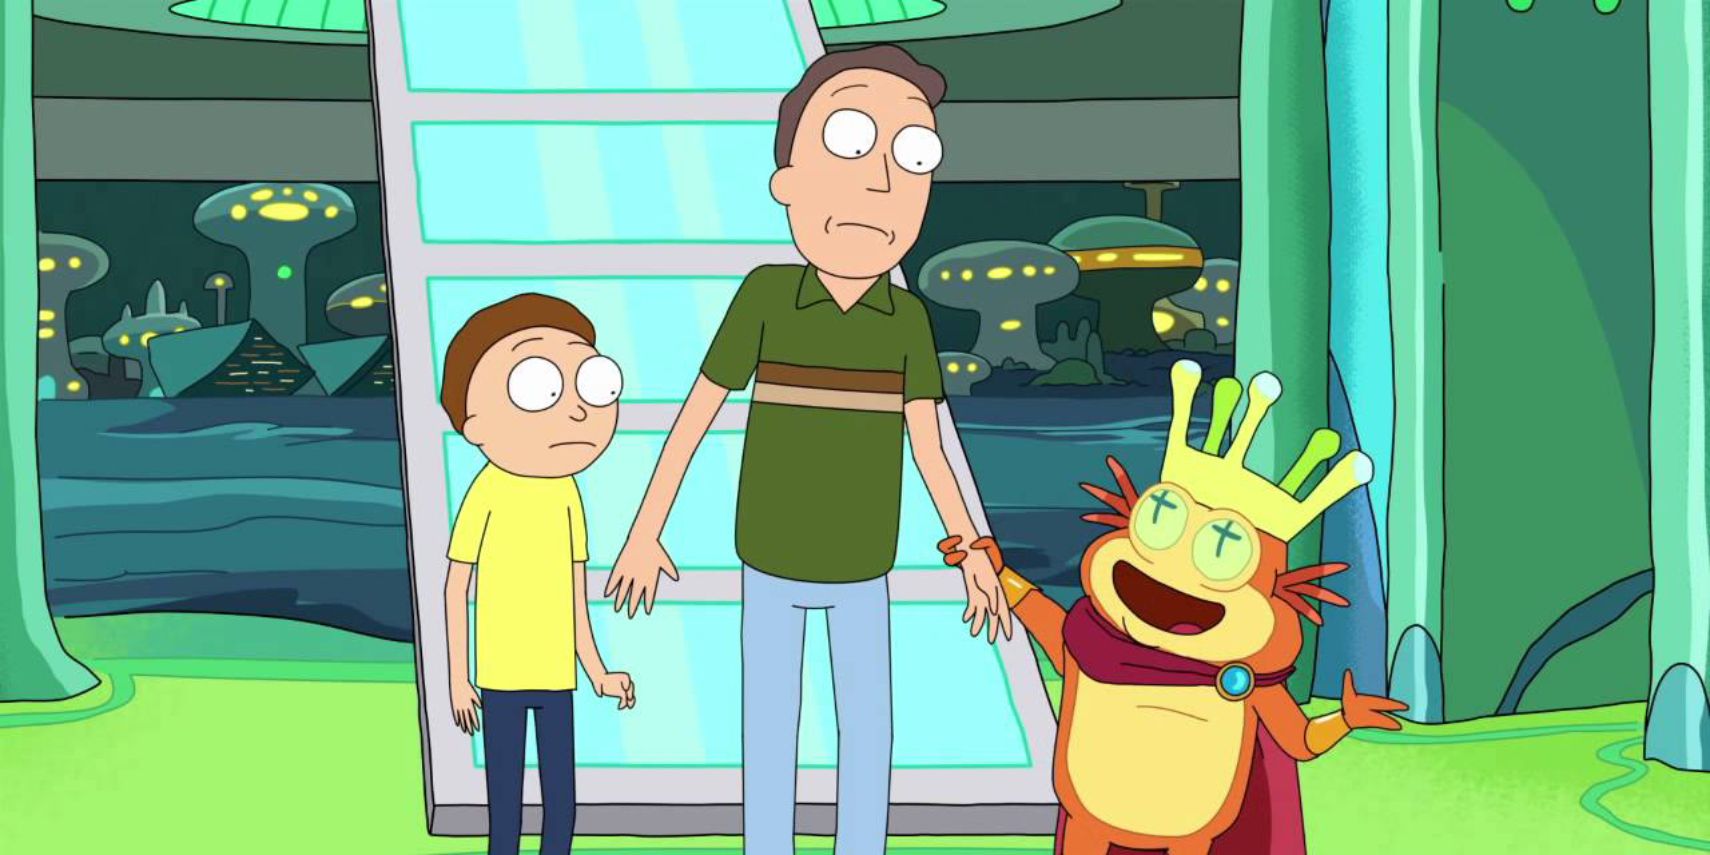 King Flippynips holding Jerry's hand in Rick and Morty with Morty